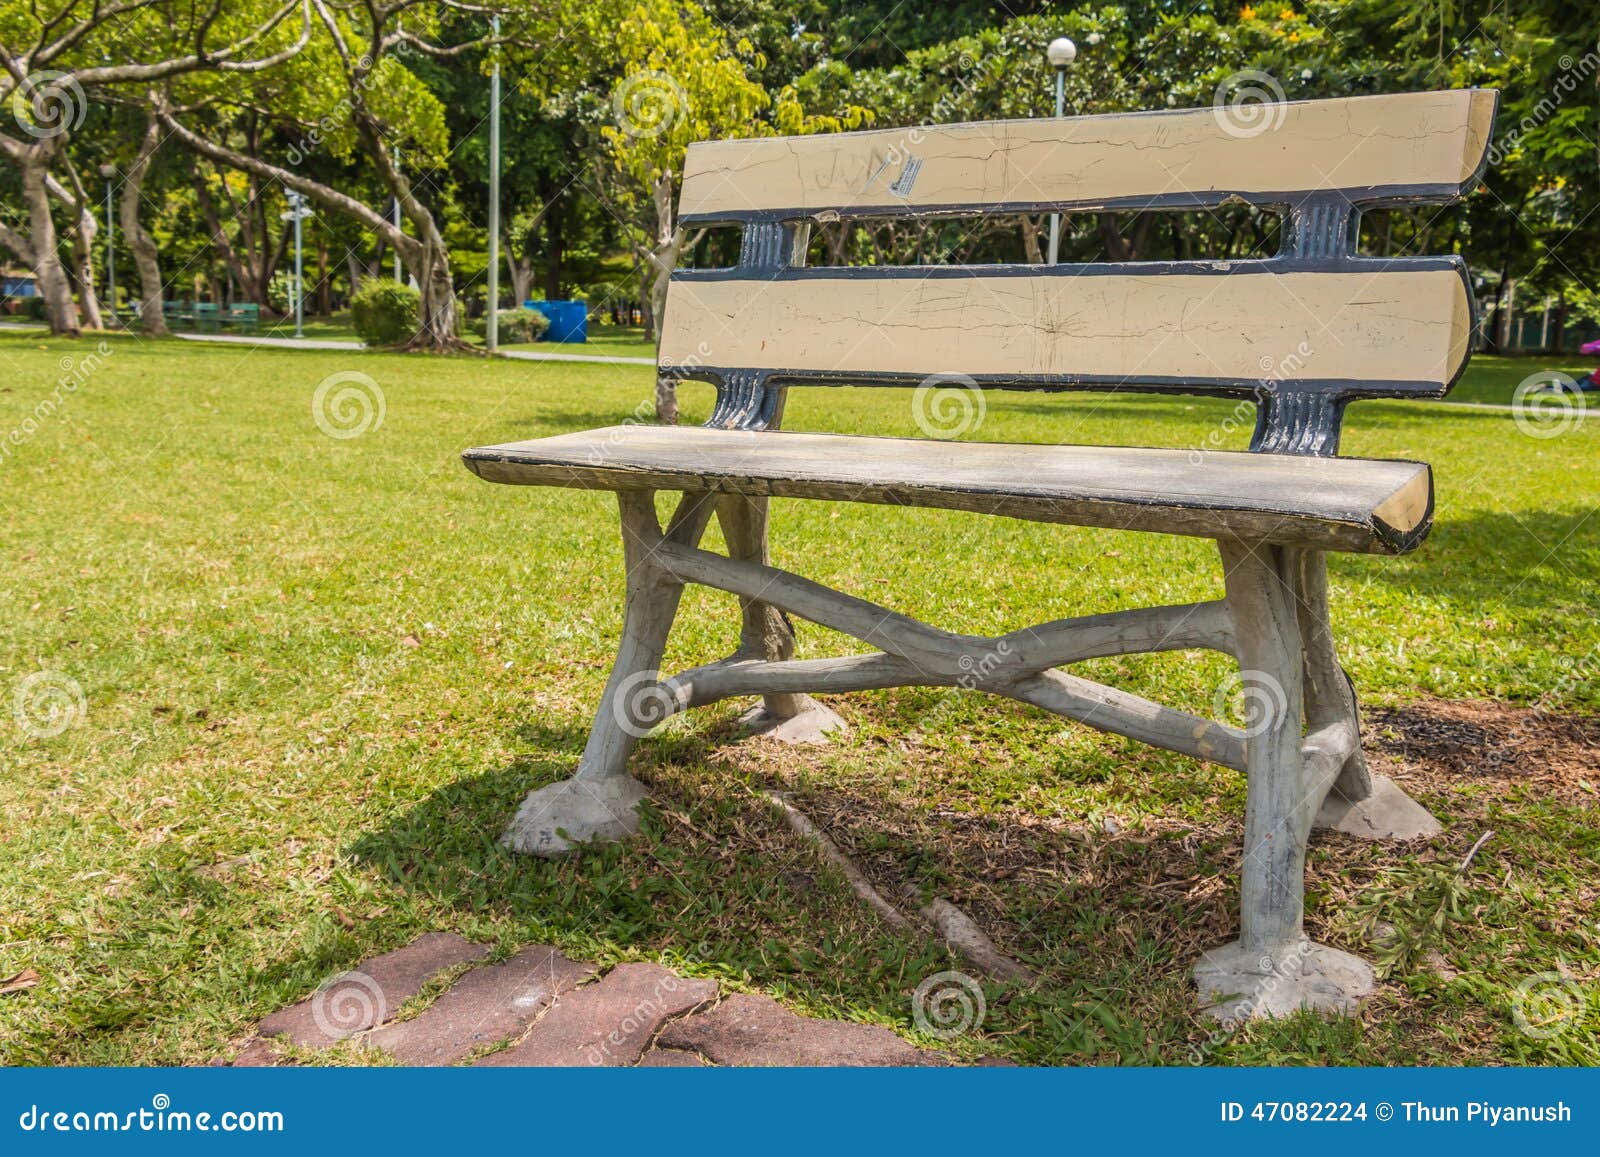 Chair in Garden Background Thailand Stock Photo - Image of chair, furniture:  47082224